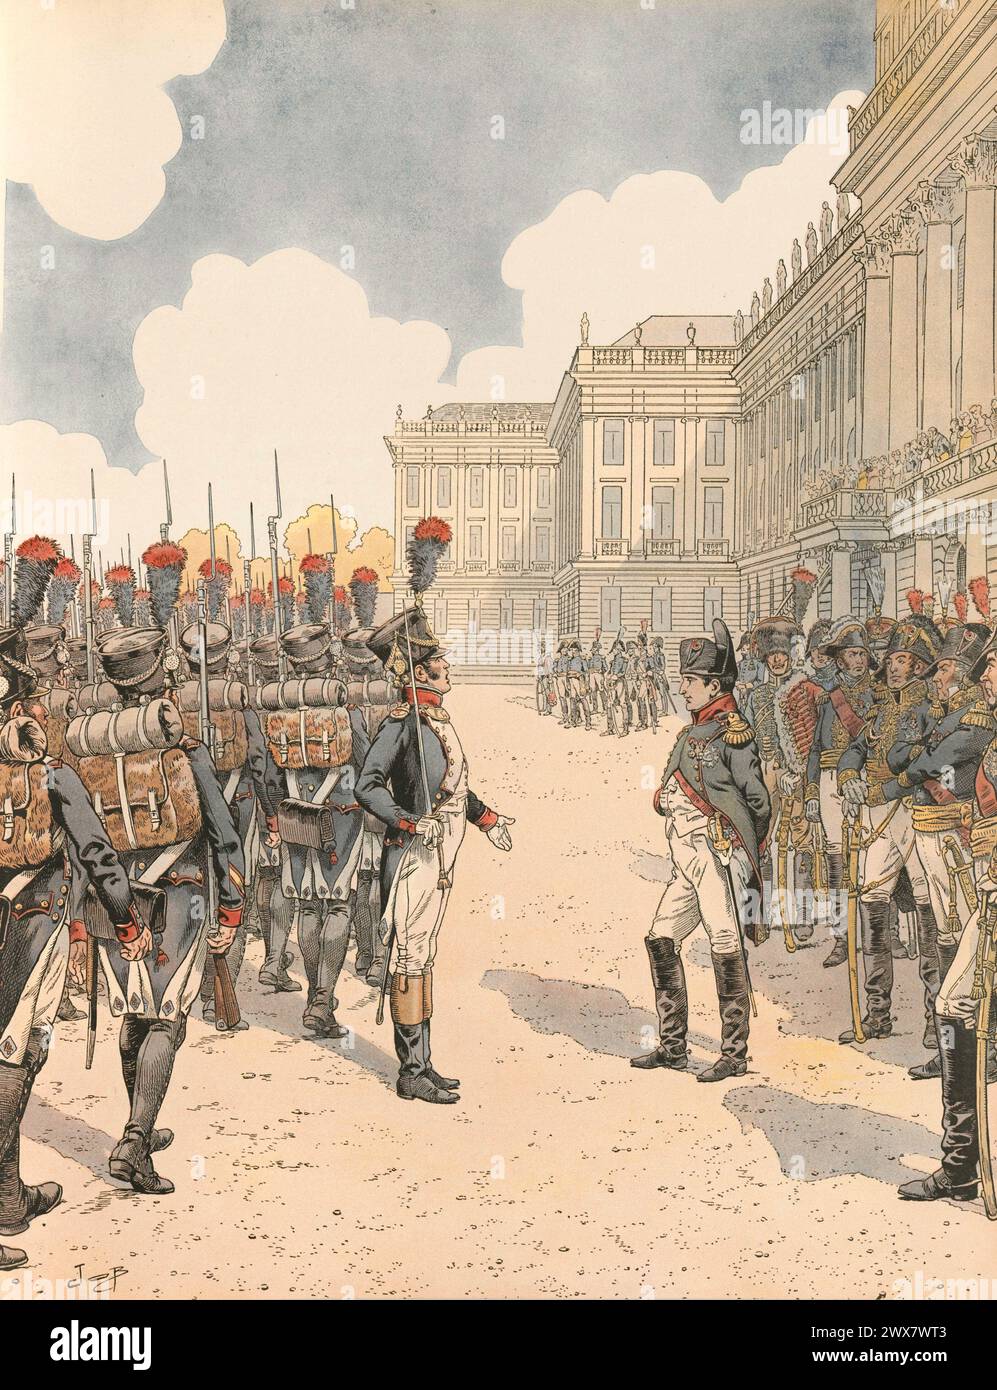 Review of Napoleon I's army at Schönbrunn (Austria) in 1809.  Illustration by Job from the book 'Napoléon' written by Georges Montorgueil, published in 1921 by Boivin (Paris). Stock Photo